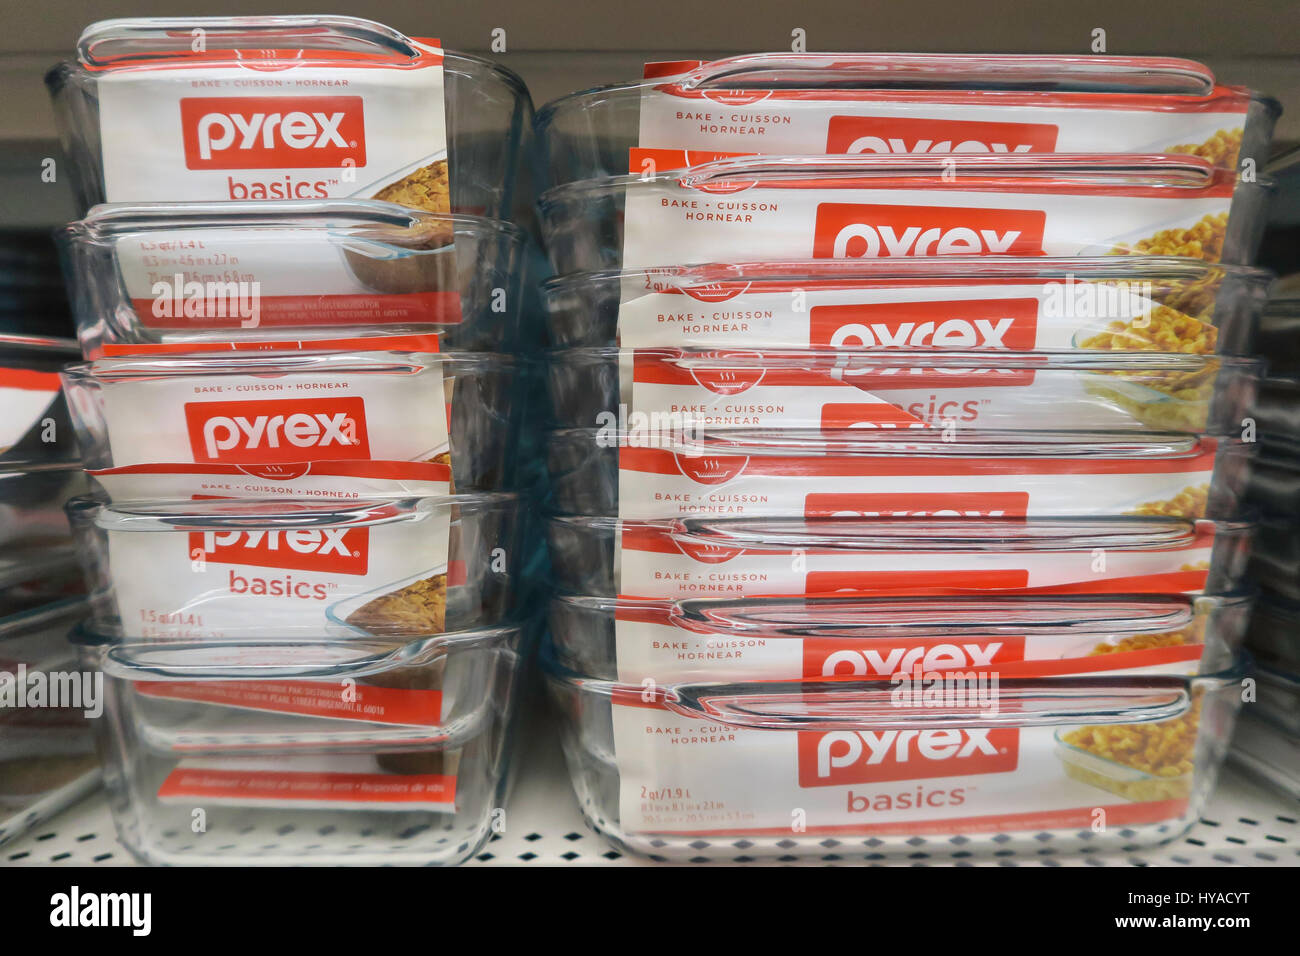 Pyrex Brand Cooking Pans, Kmart, NYC, UDS Stock Photo